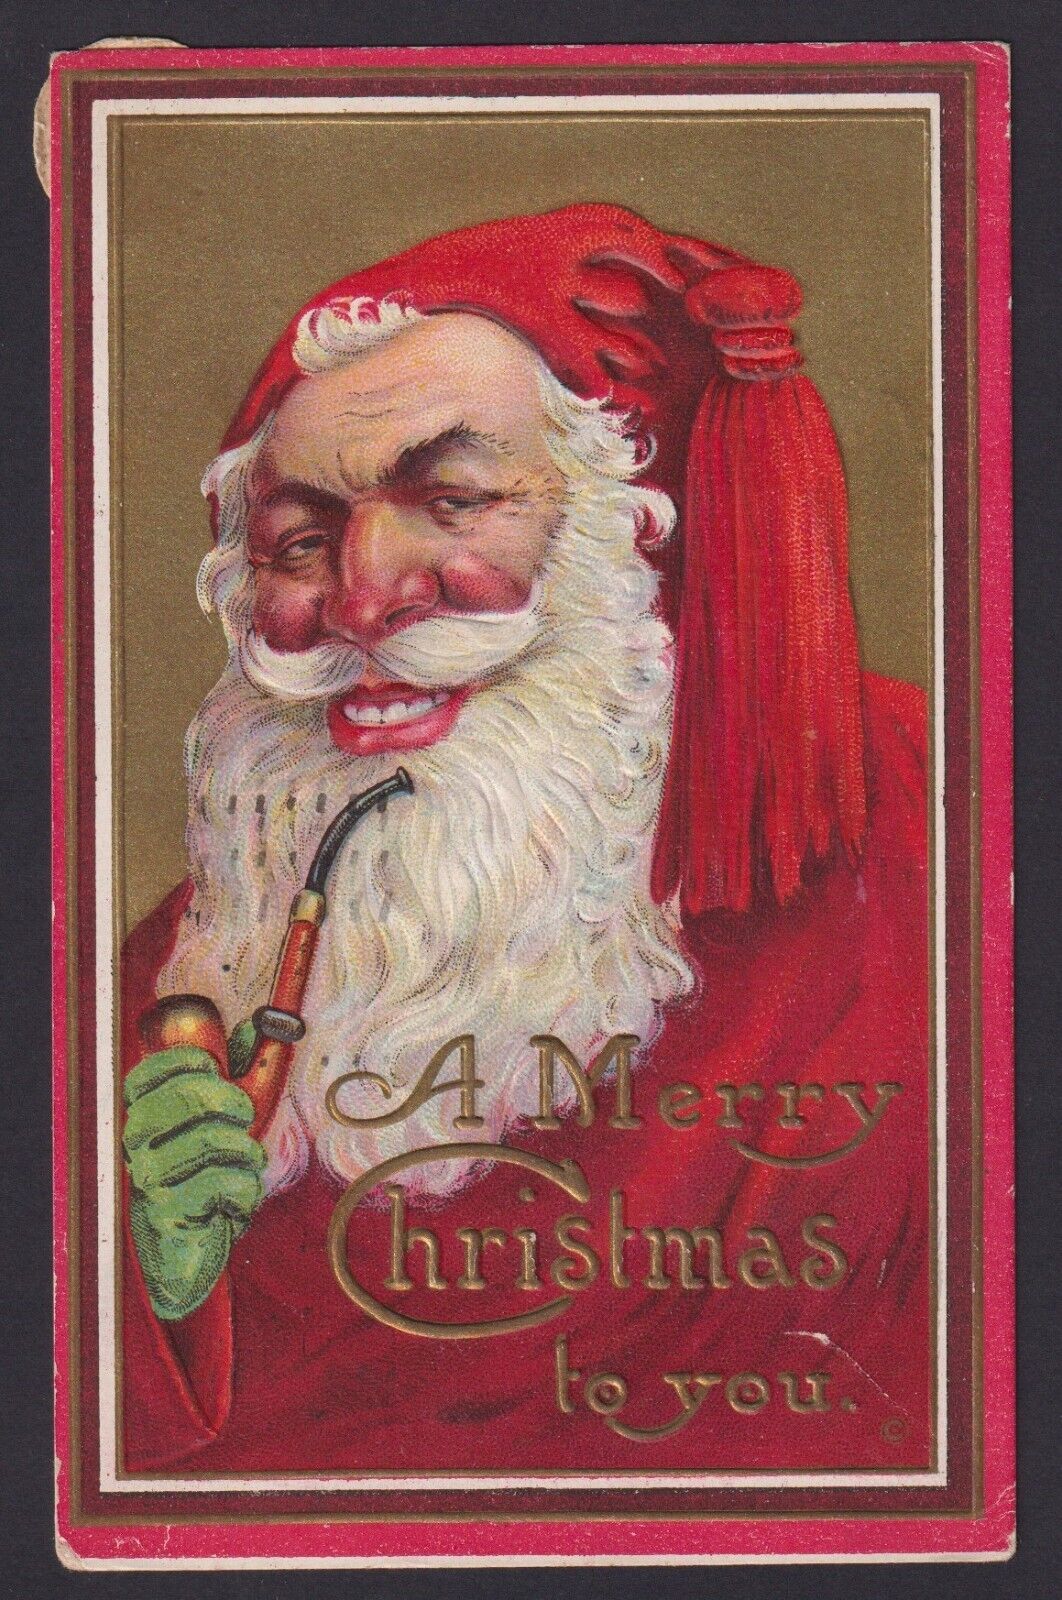 Postcard A Merry Christmas To You Grinning Santa Rosy Cheeks Smoking a Pipe